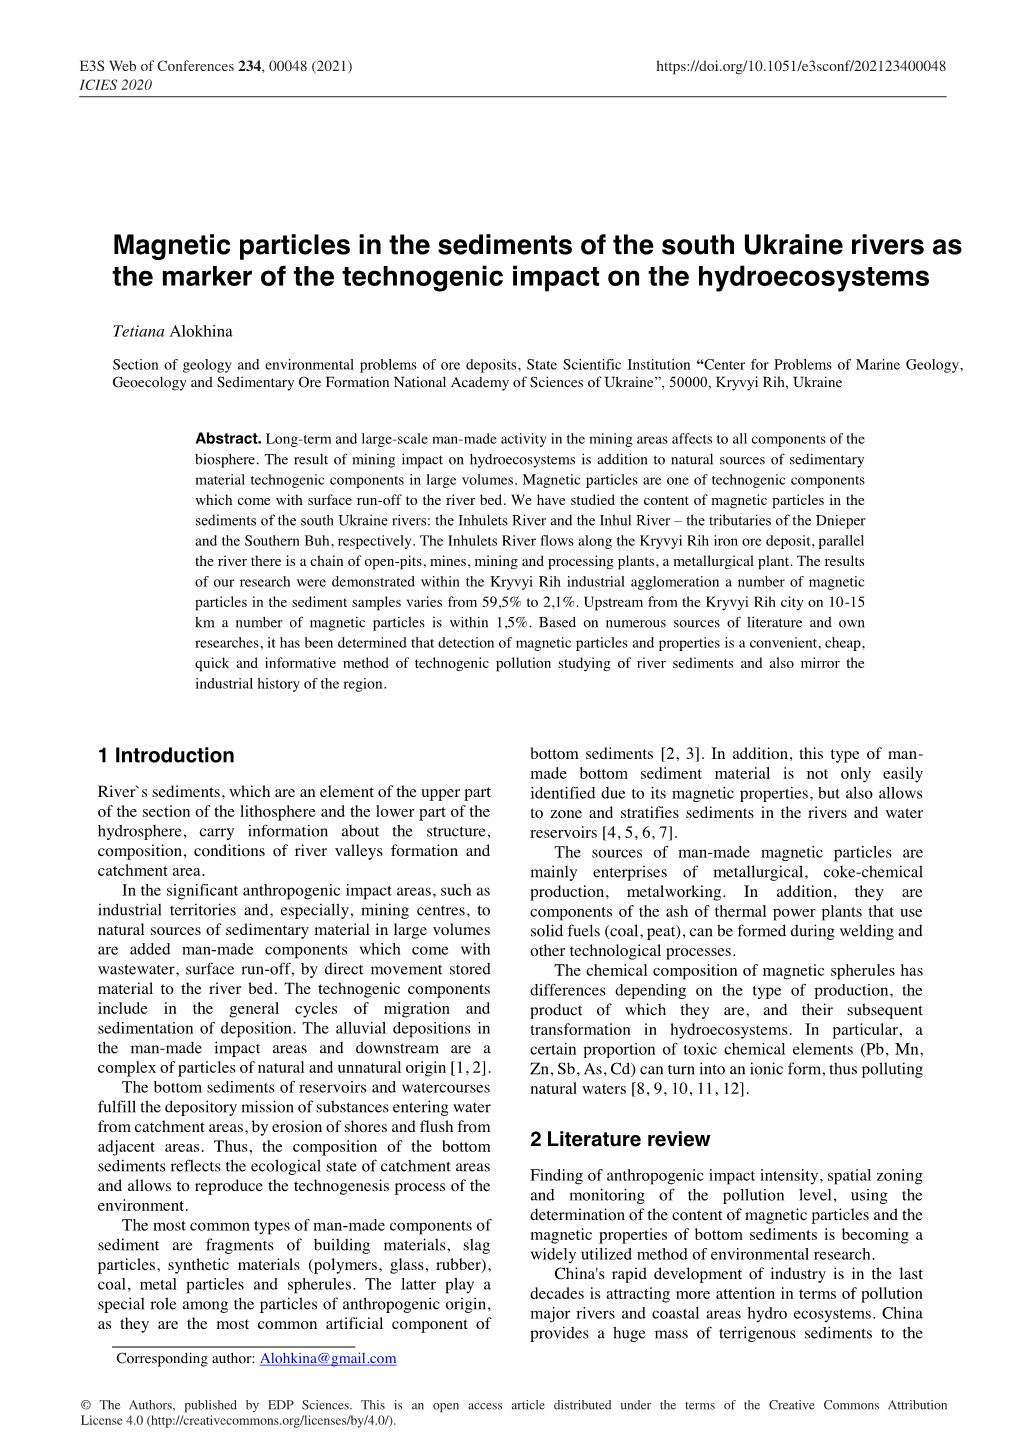 Magnetic Particles in the Sediments of the South Ukraine Rivers As the Marker of the Technogenic Impact on the Hydroecosystems